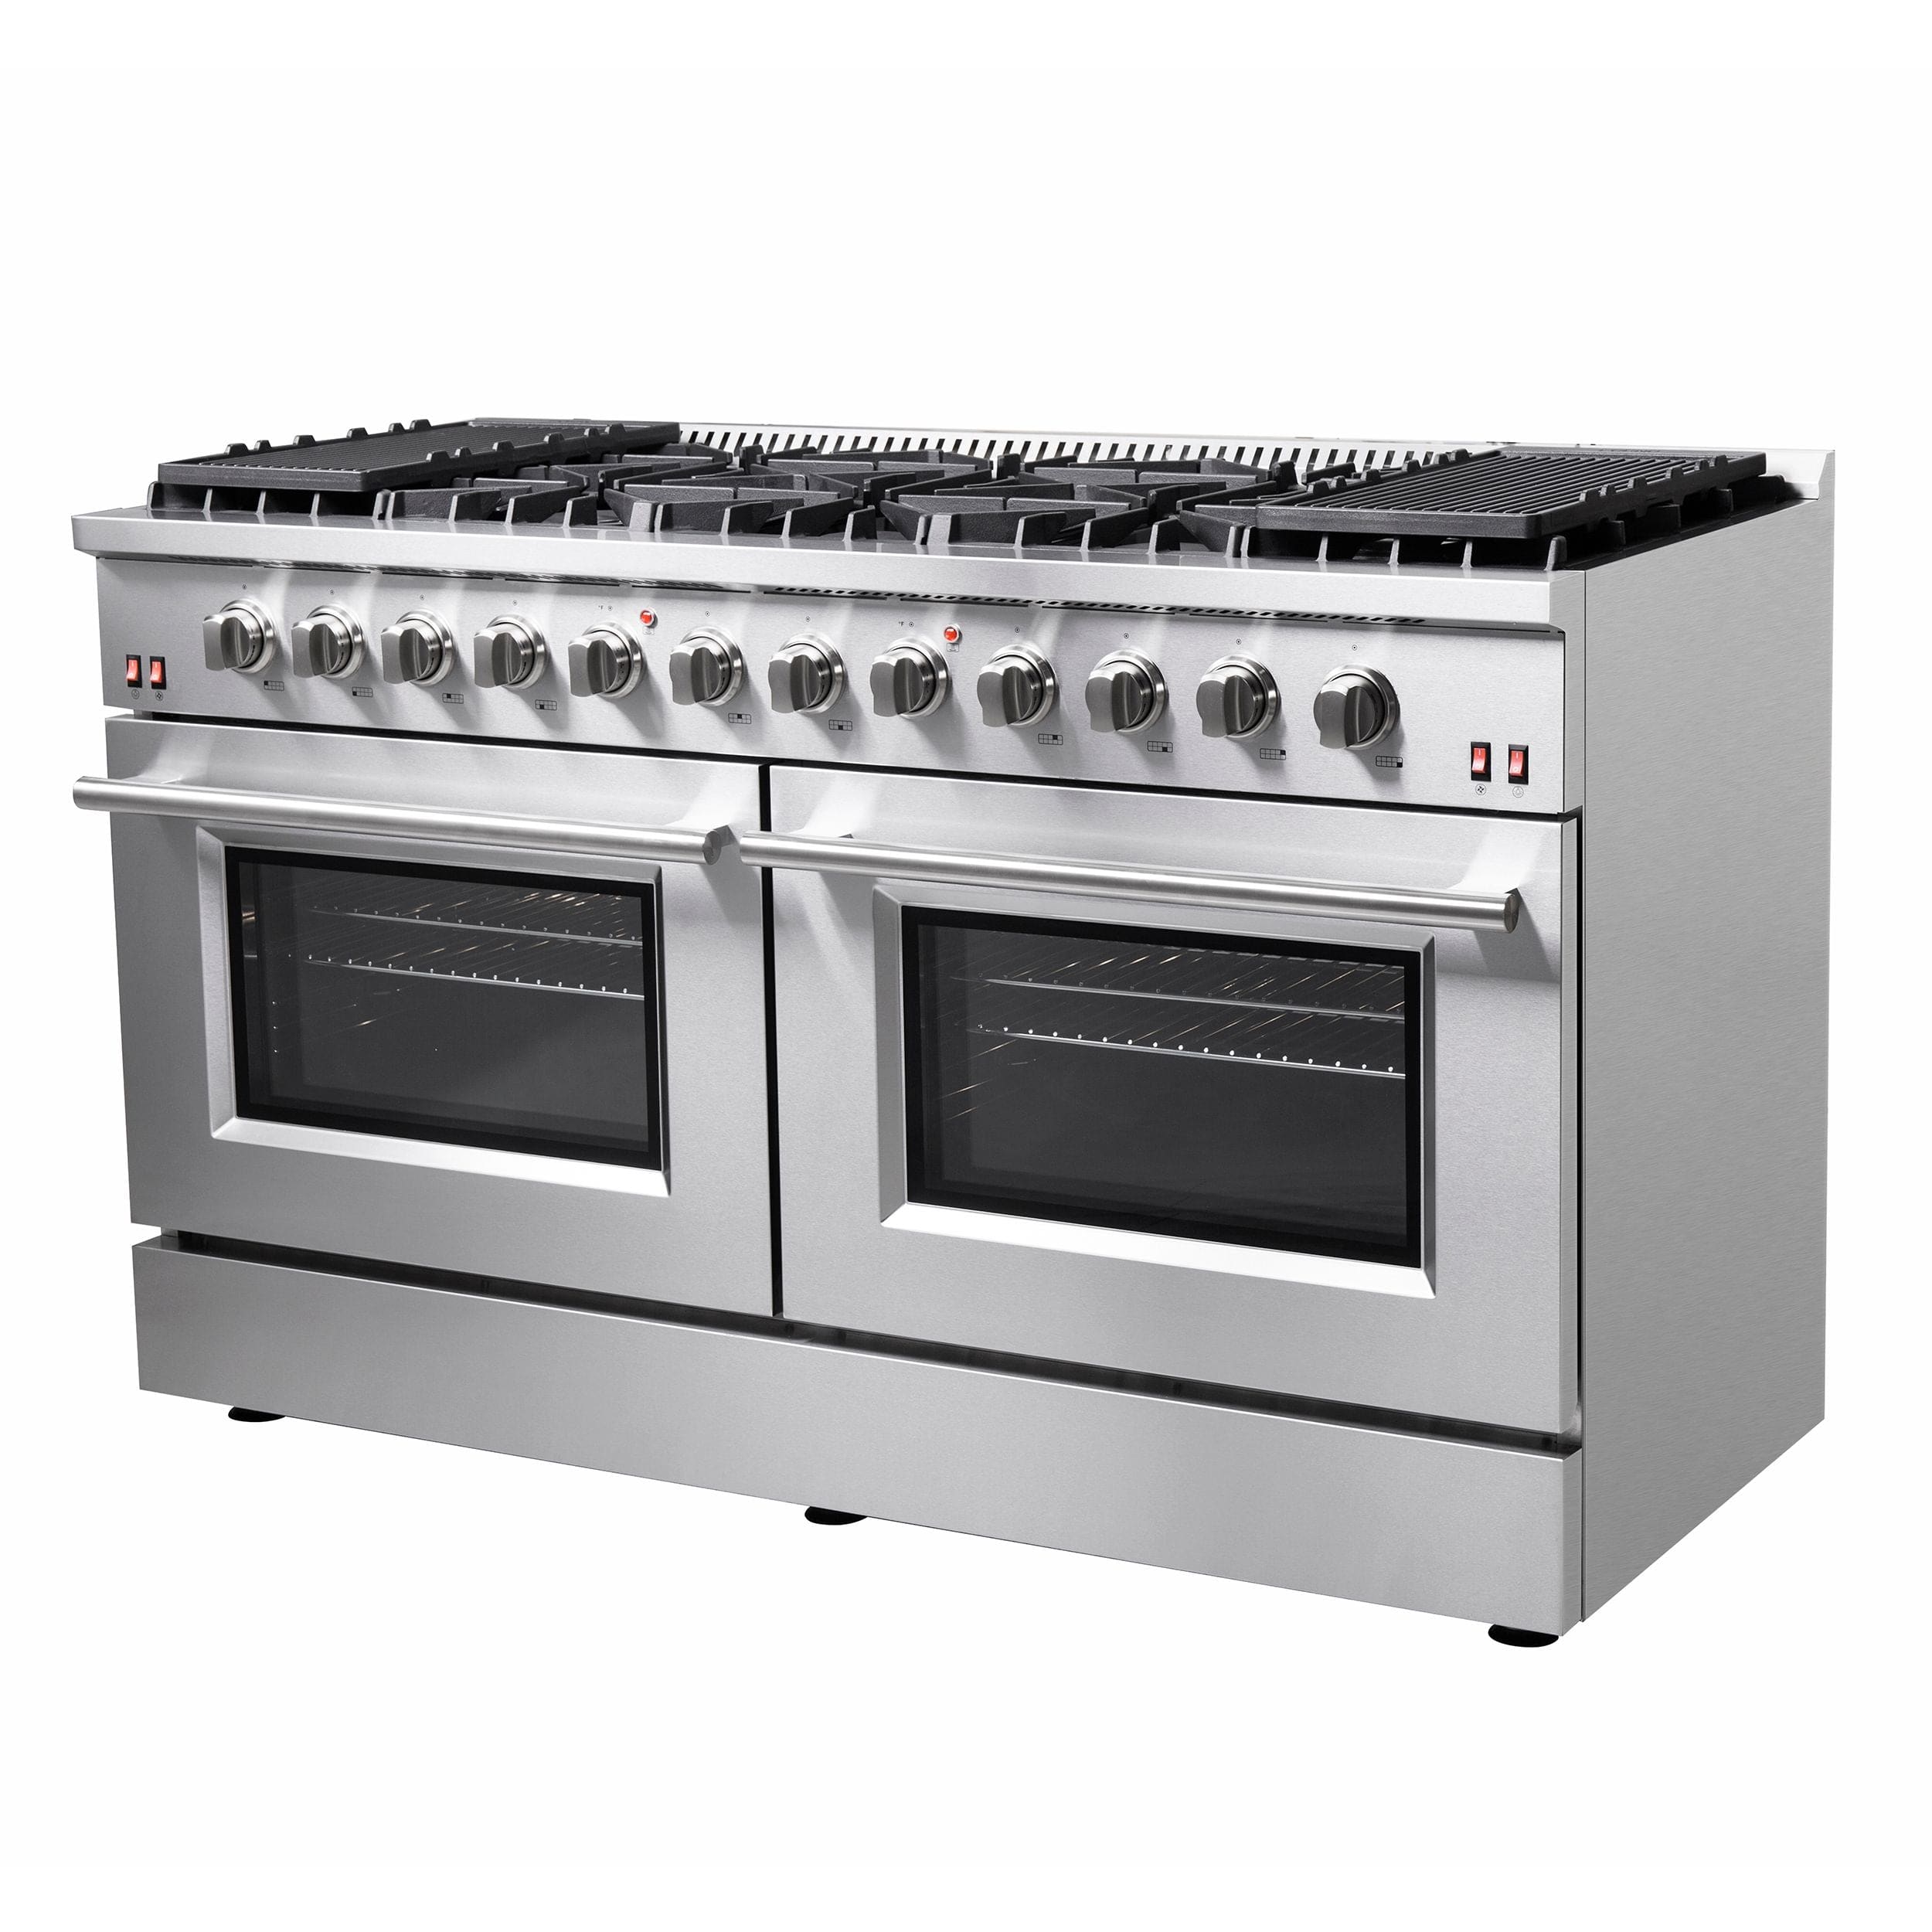 Forno Galiano 60 In. 8.64 cu. ft. Professional Freestanding Gas Range in Stainless Steel, FFSGS6244-60 Ranges FFSGS6244-60 Luxury Appliances Direct